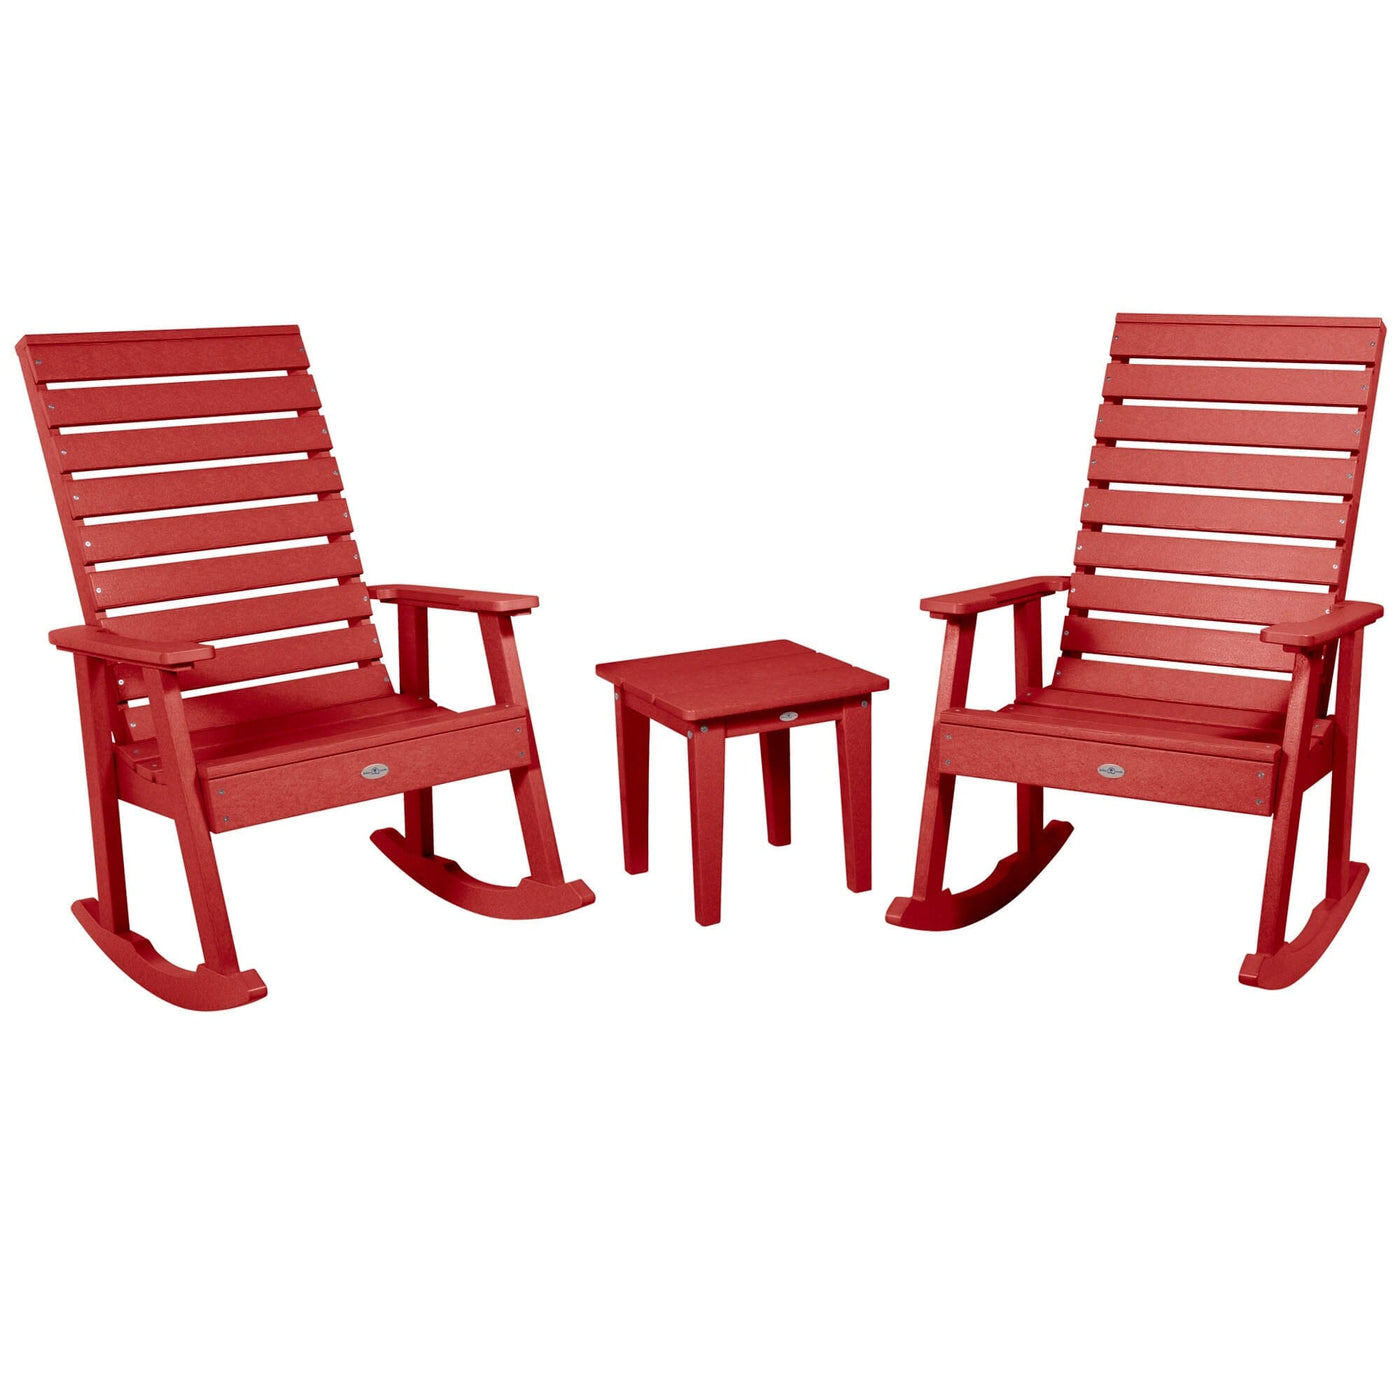 Riverside Rocking Chair and Side Table 3pc Set Kitted Set Bahia Verde Outdoors Boathouse Red 